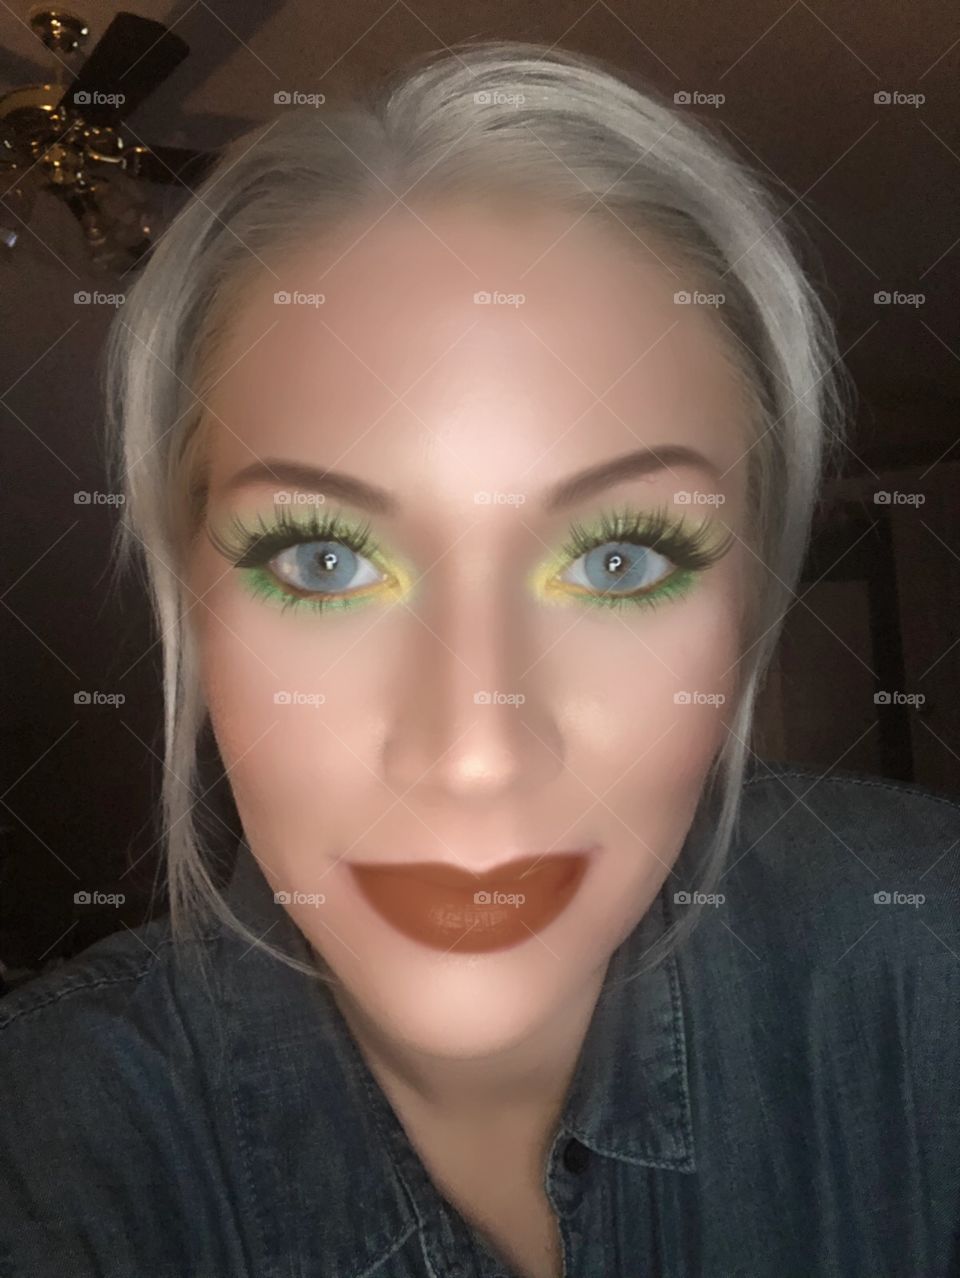 Just another selfie of yellow & green eyeshadow showing thinner brows with a fall matte lip by Maybelline.  If you’re into makeup please follow album.